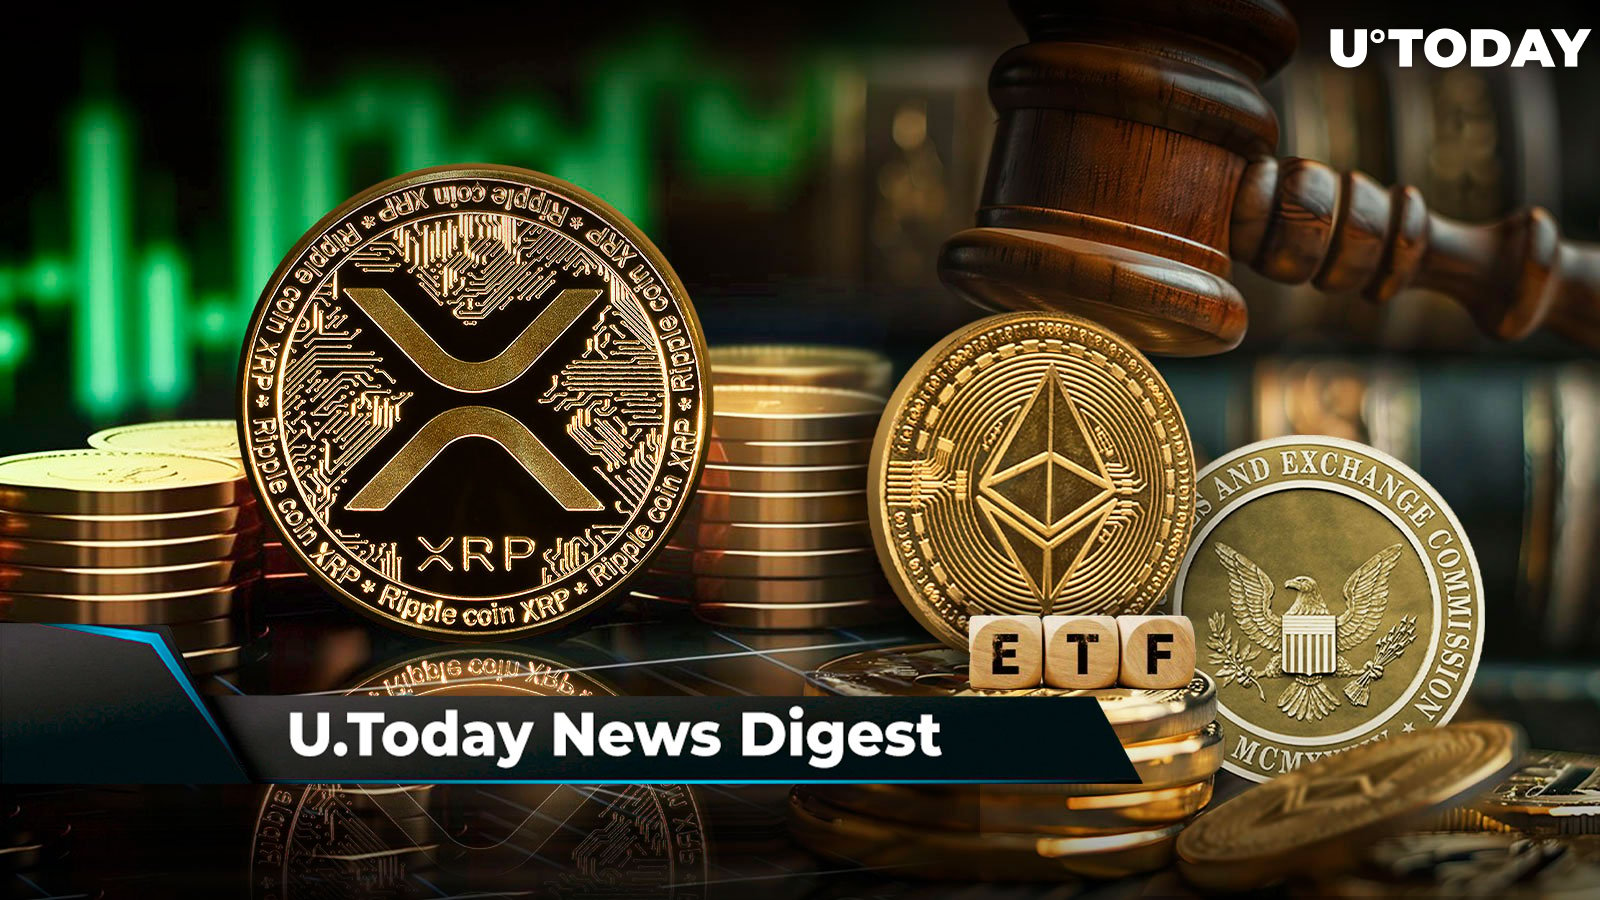 XRP Surges to New All-Time High in Millionaire Addresses, SEC Delays Decision on Another Spot Ethereum ETF: Crypto News Digest by U.Today